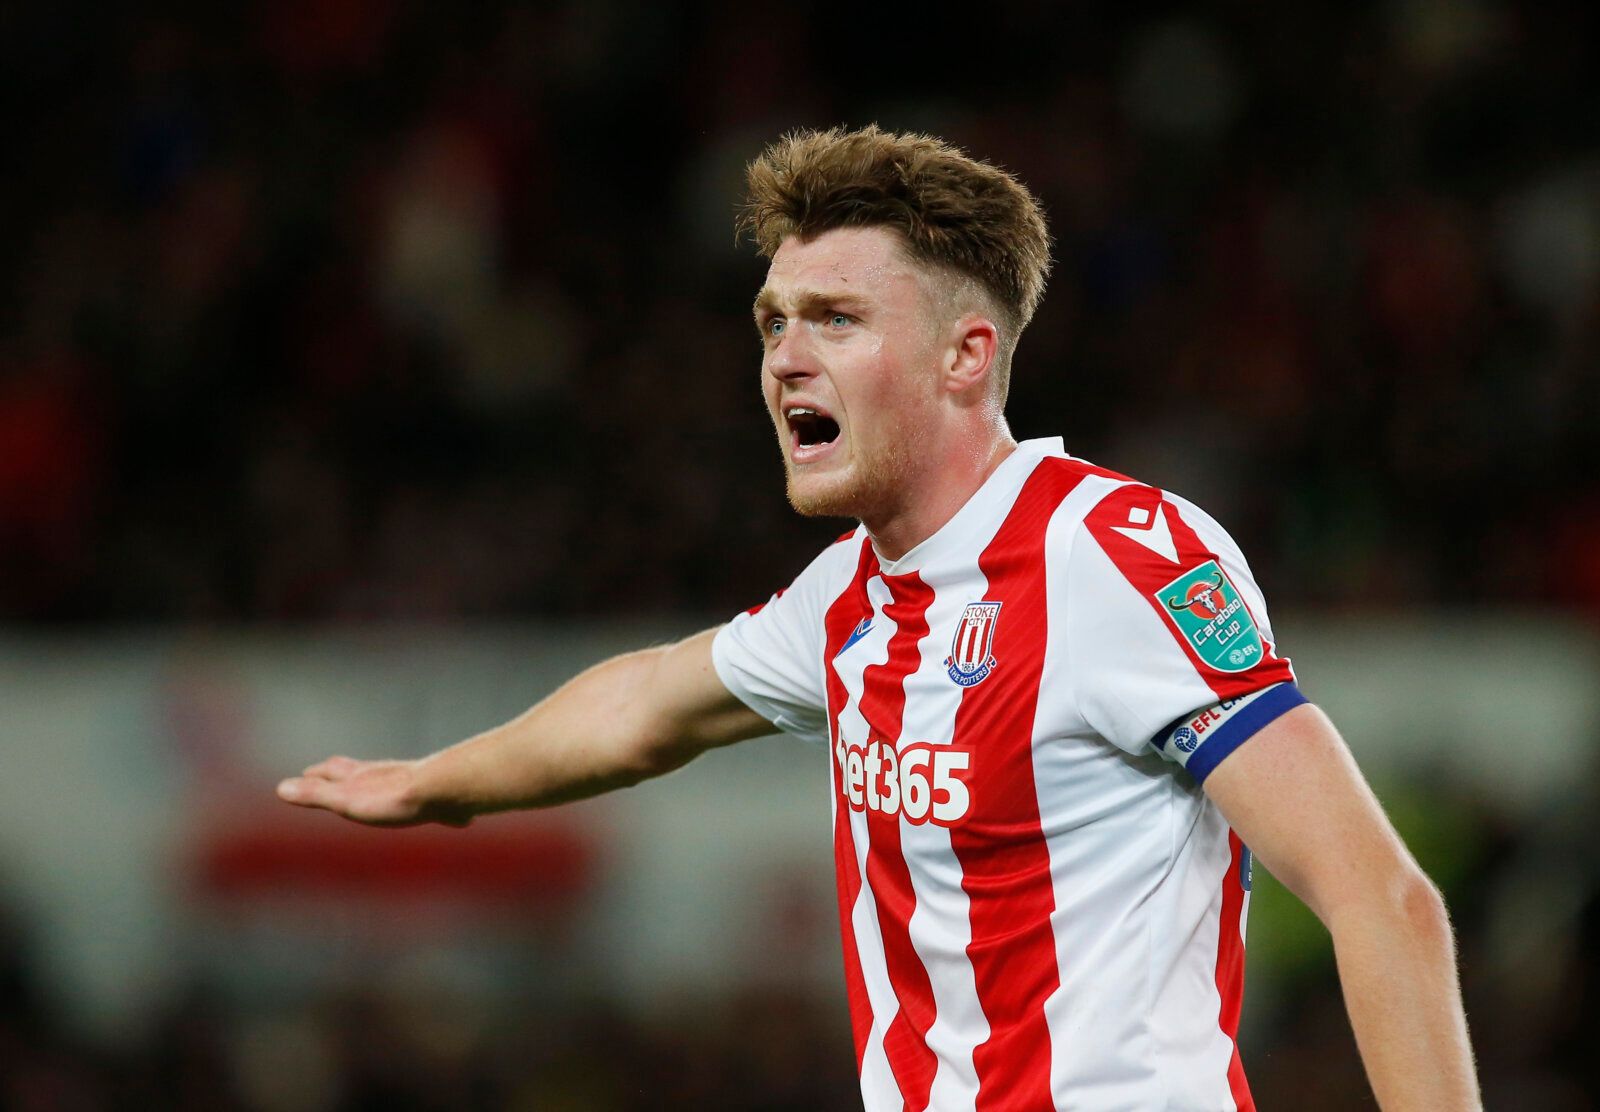 Soccer Football - Carabao Cup - Round of 16 - Stoke City v Brentford - bet365 Stadium, Stoke-on-Trent, Britain - October 27, 2021  Stoke City's Harry Souttar reacts Action Images via Reuters/Craig Brough EDITORIAL USE ONLY. No use with unauthorized audio, video, data, fixture lists, club/league logos or 'live' services. Online in-match use limited to 75 images, no video emulation. No use in betting, games or single club /league/player publications.  Please contact your account representative for